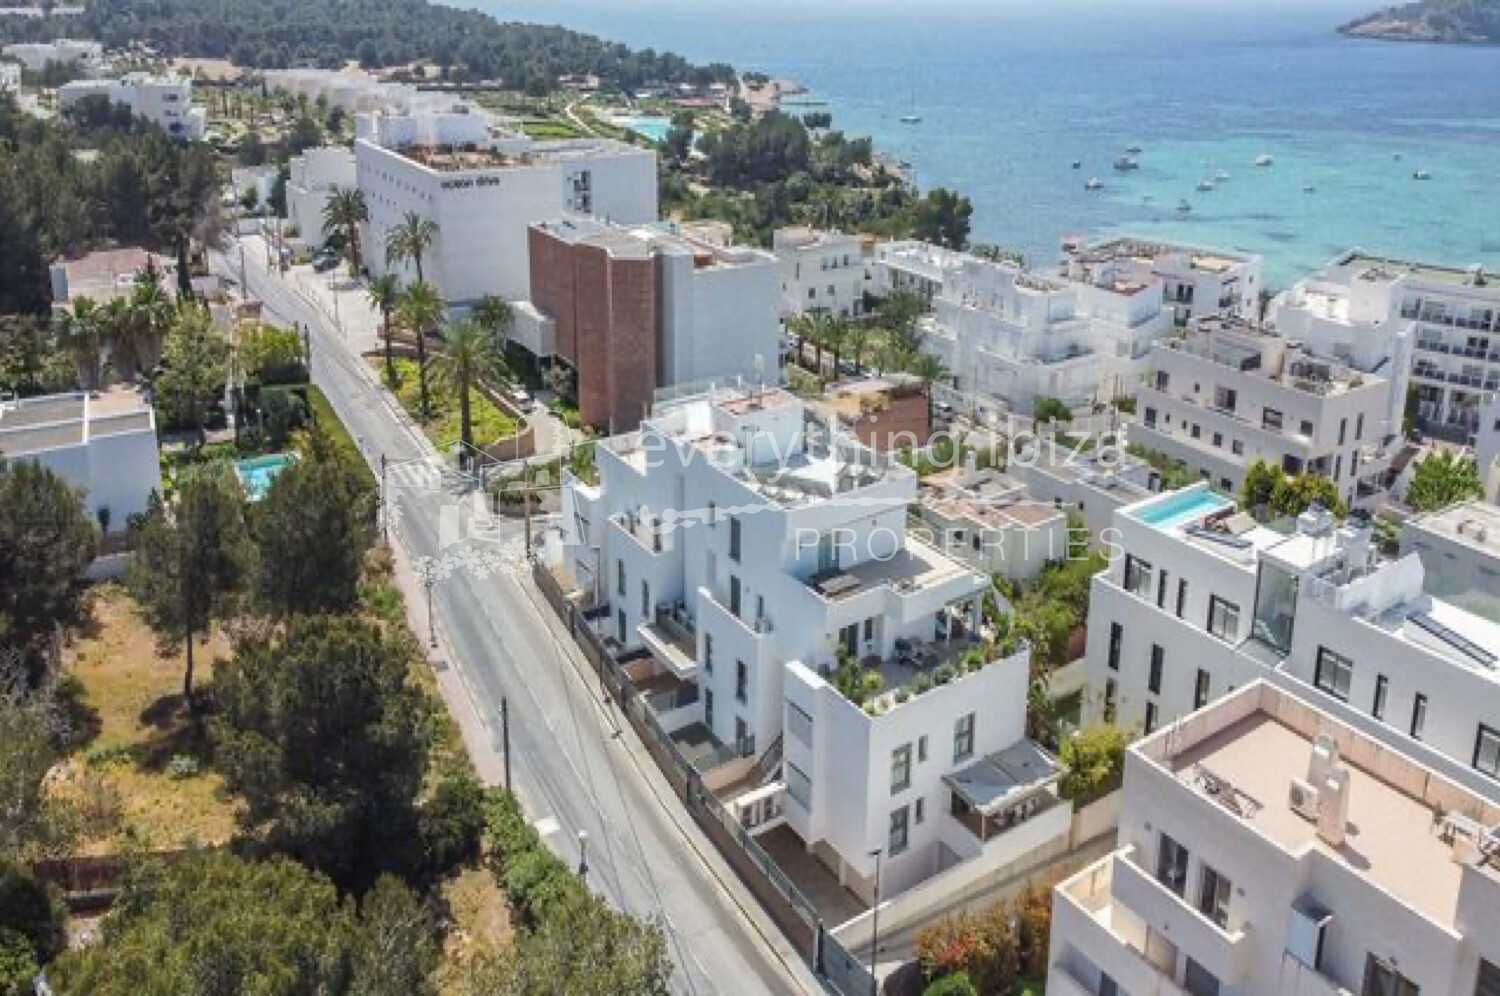 Beautifully Refurbished Apartment in Cap Martinet with Sea Views, ref. 1606, for sale in Ibiza by everything ibiza Properties